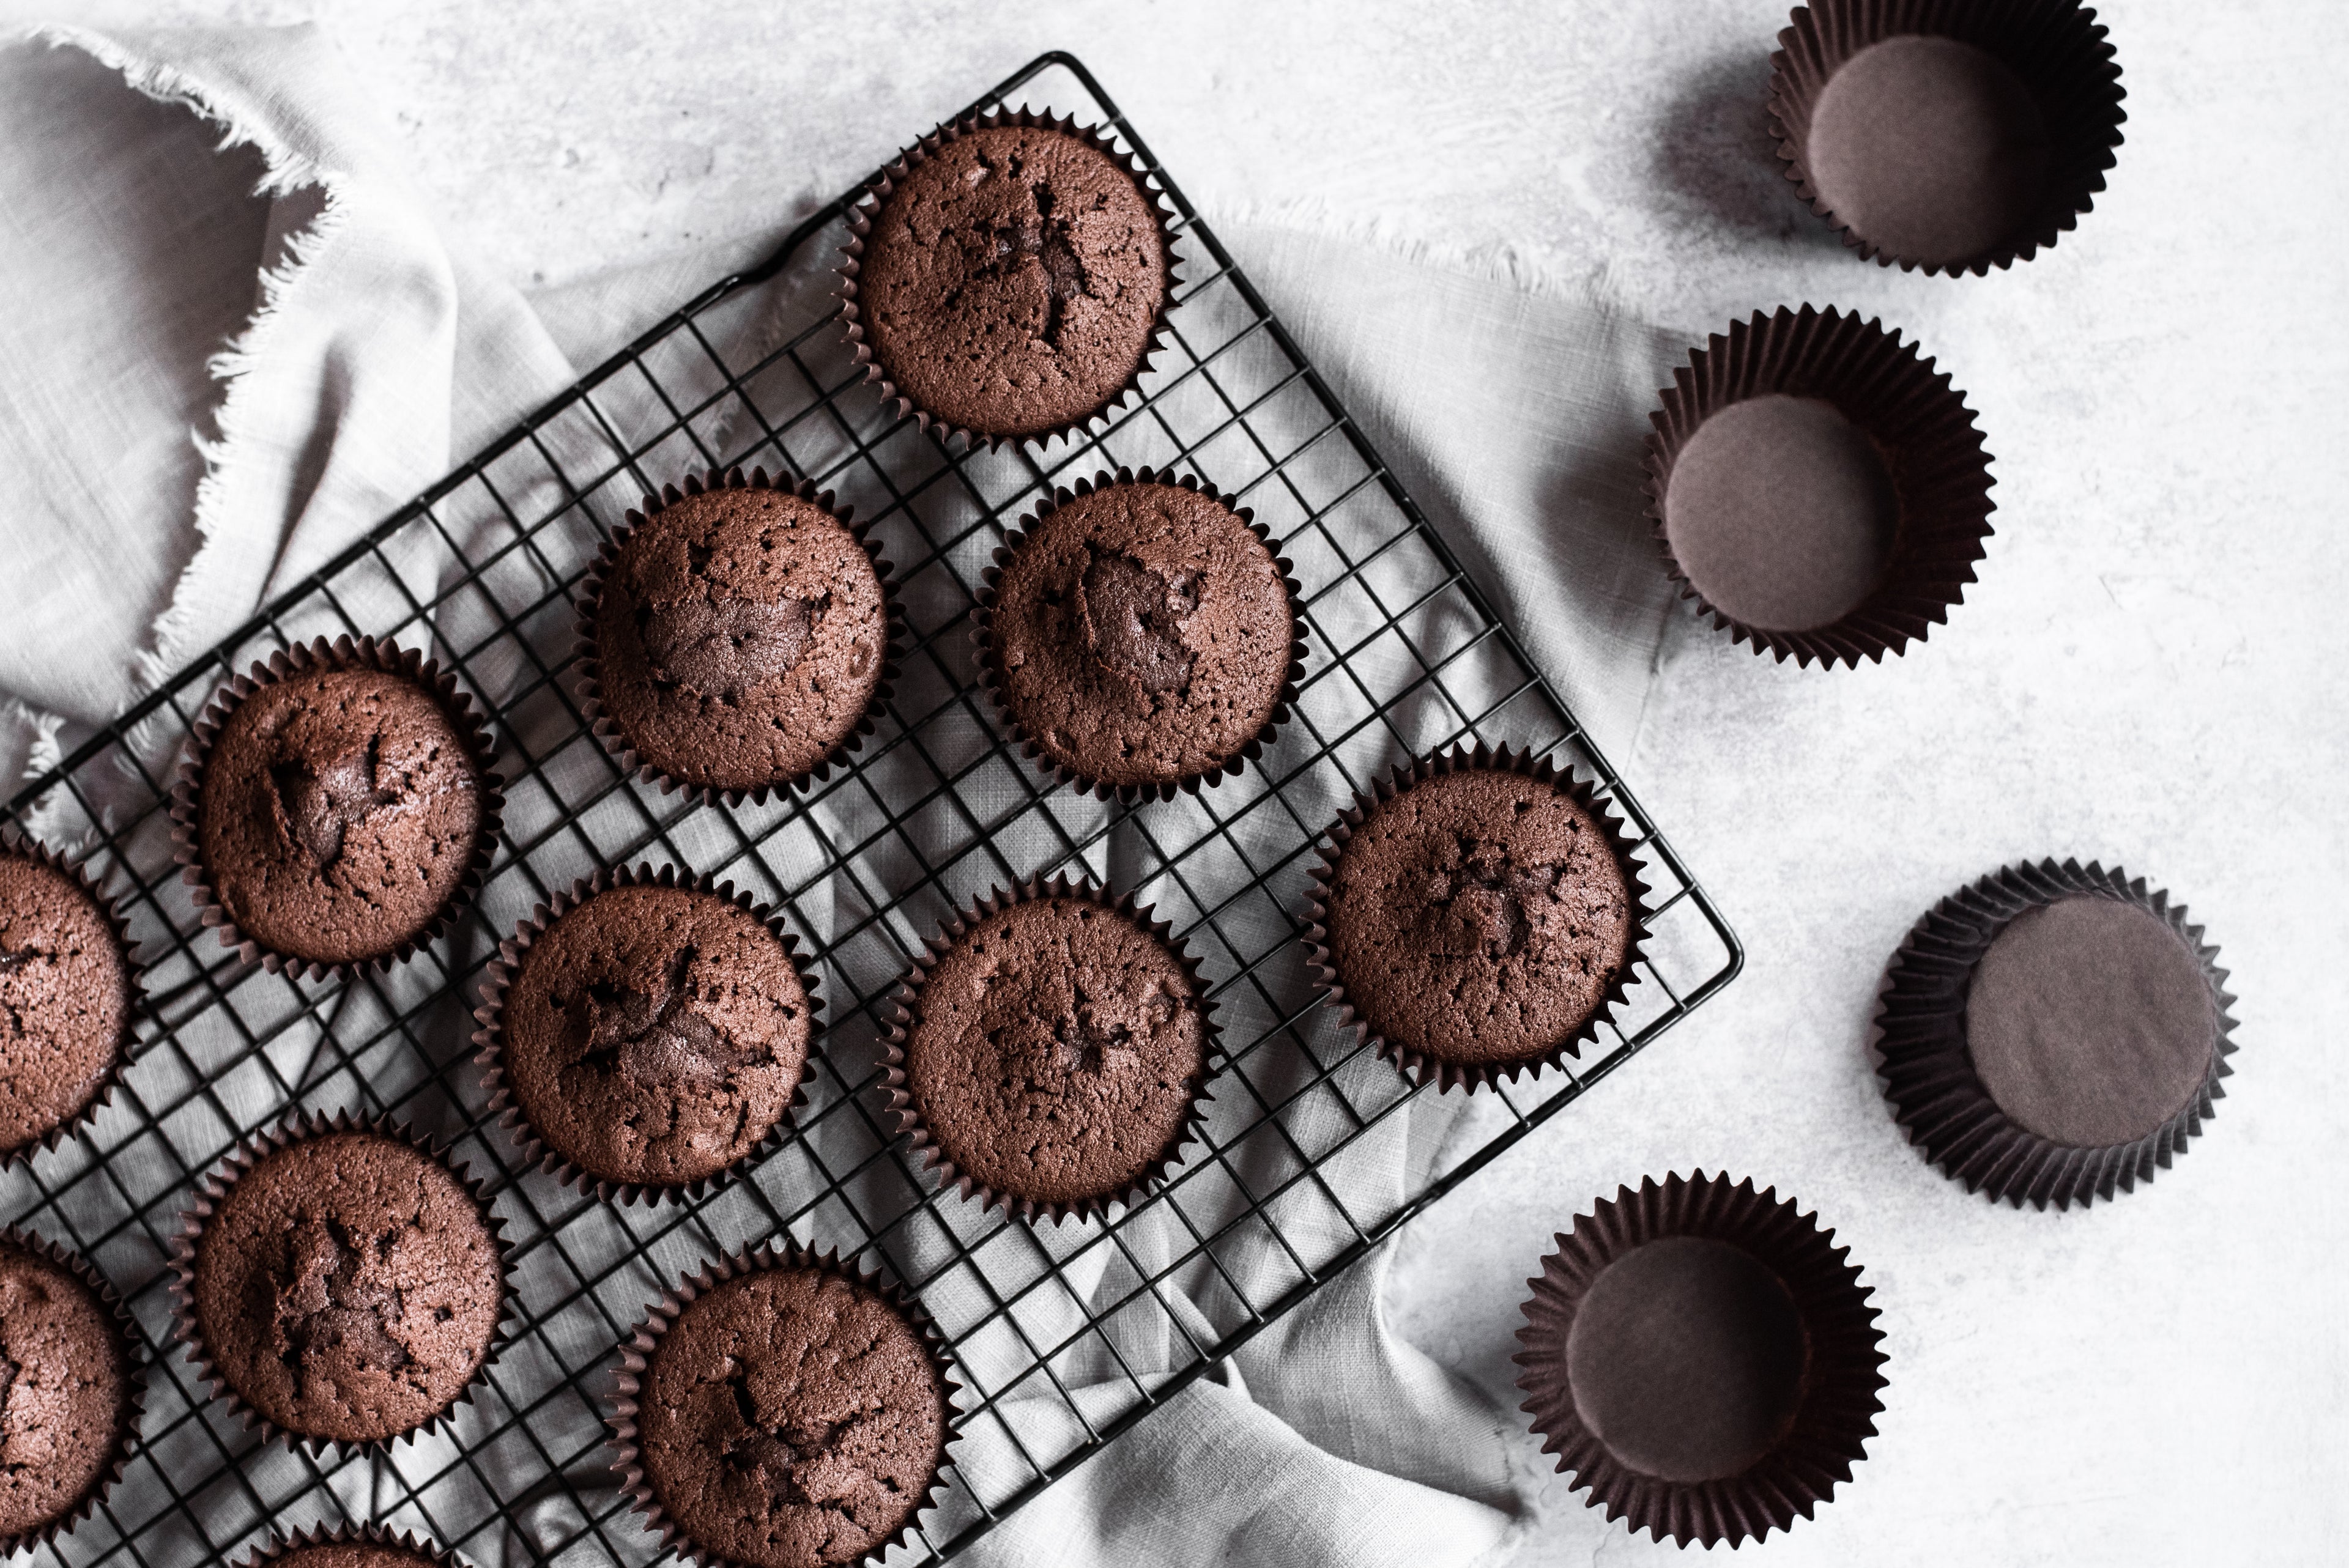 Baked chocolate cupcakes on a cooling rack